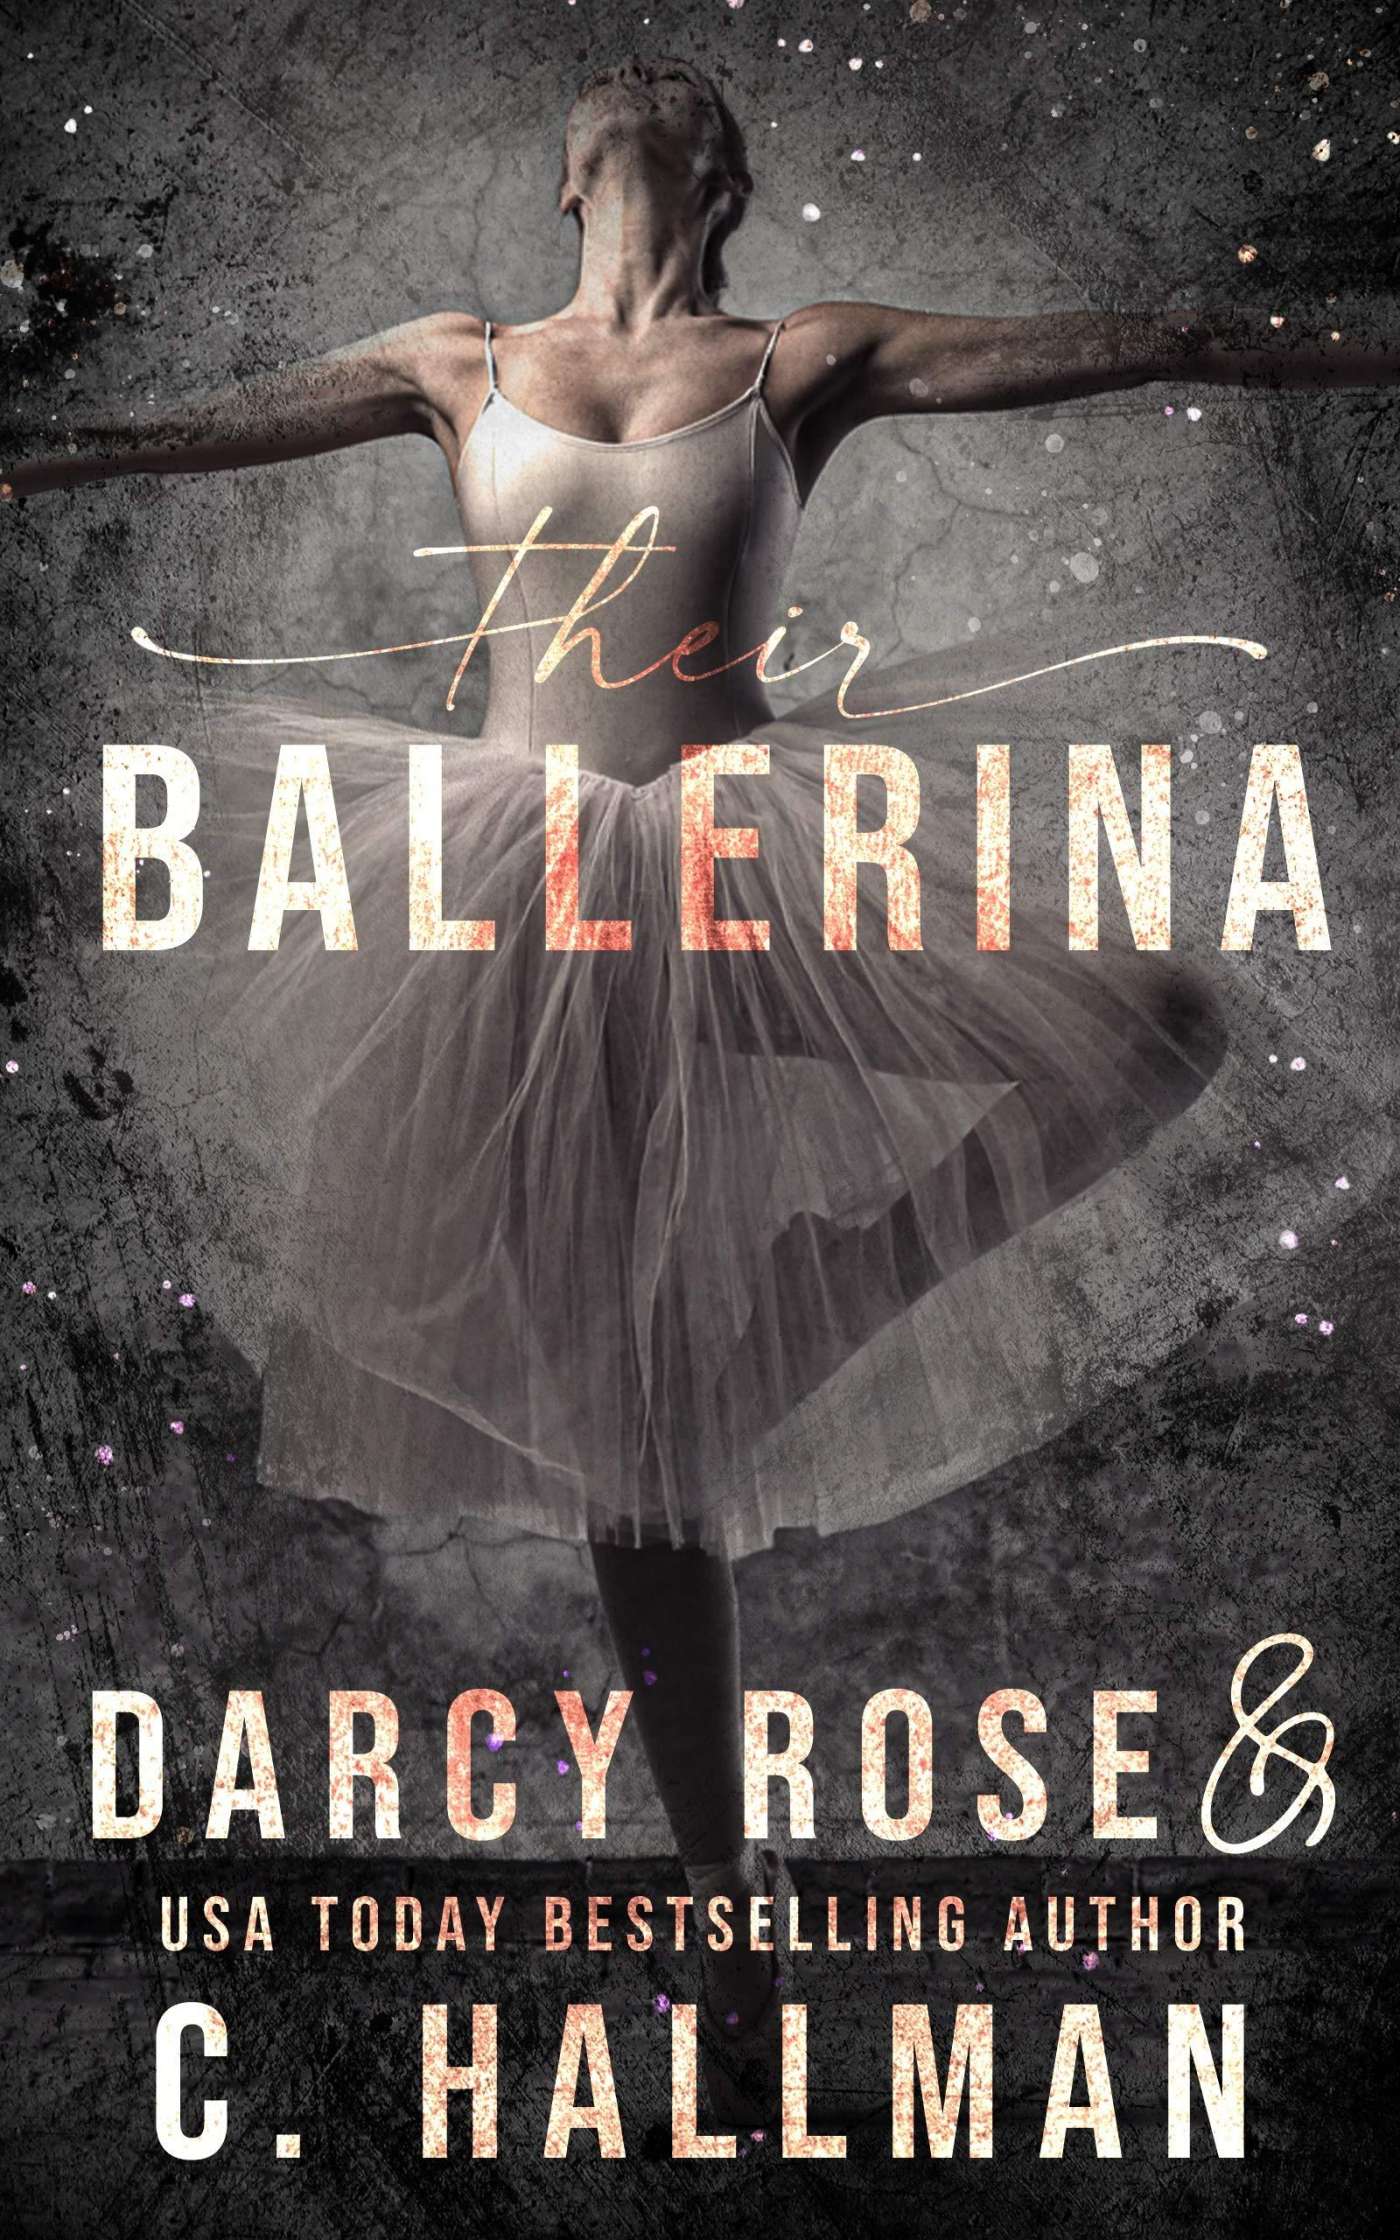 Their Ballerina (Dance for Me 2) by Darcy Rose